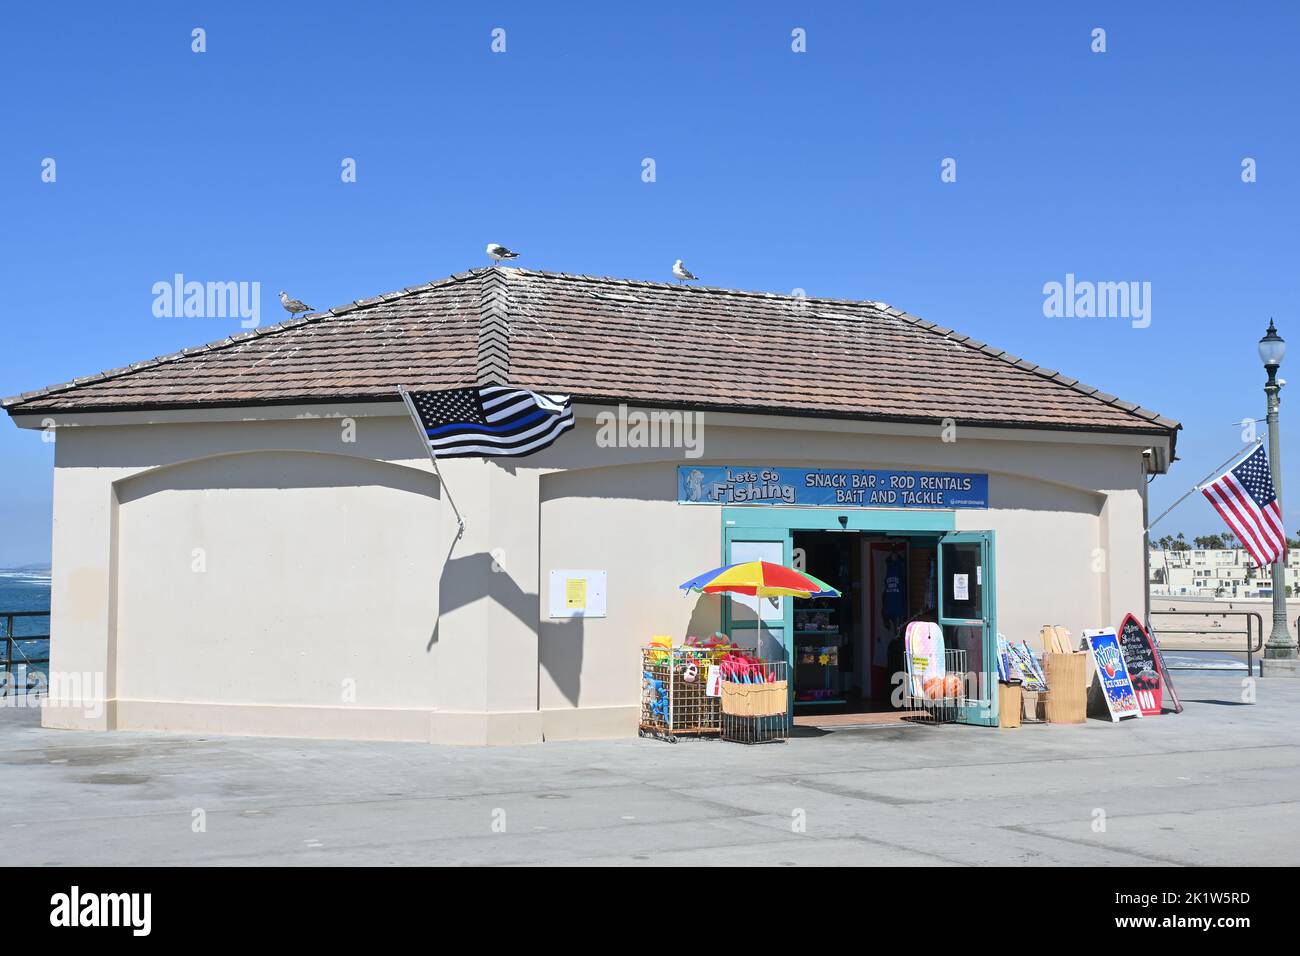 HUNTINGTON BEACH, CALIFORNIA, 19 SEPT 2022: Lets go Fishing, bait and tackle, gift shop snack bar combo on the Pier. Stock Photo